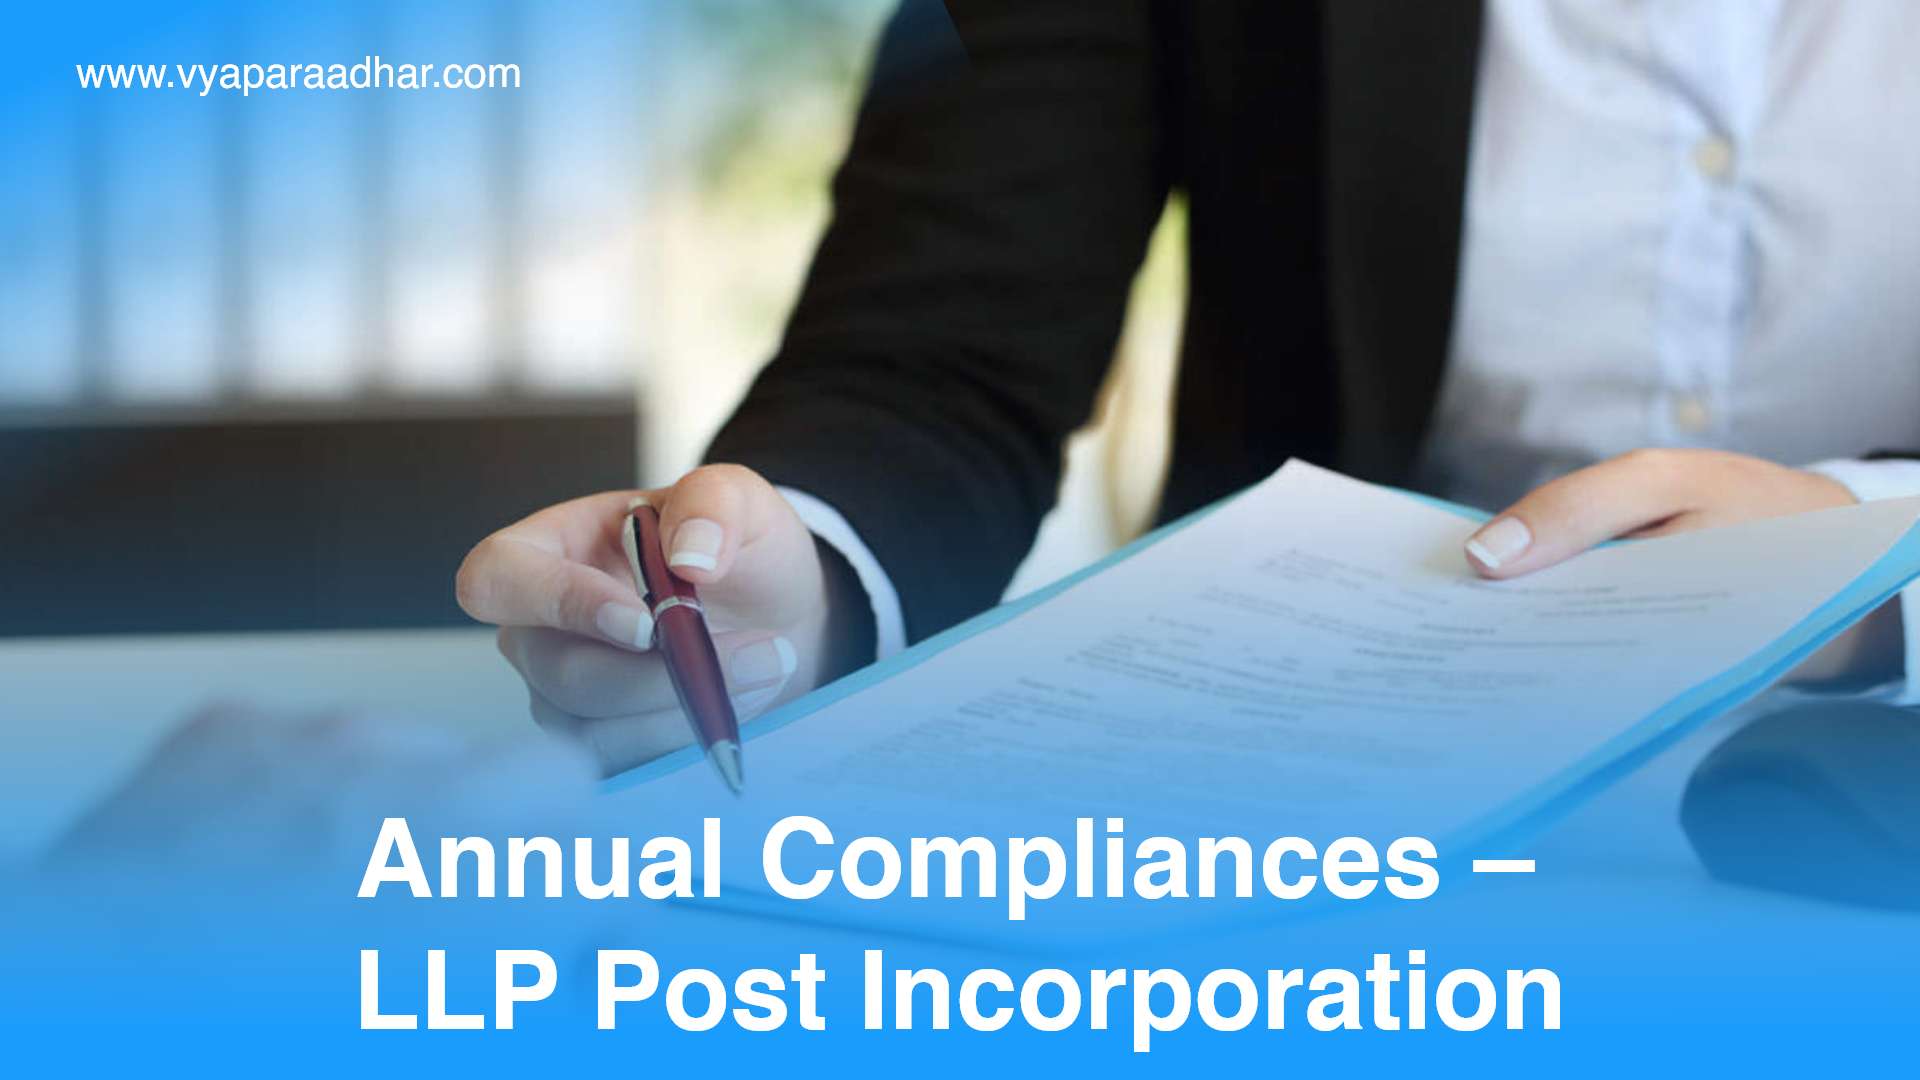 Annual Compliance – LLP Post Incorporation